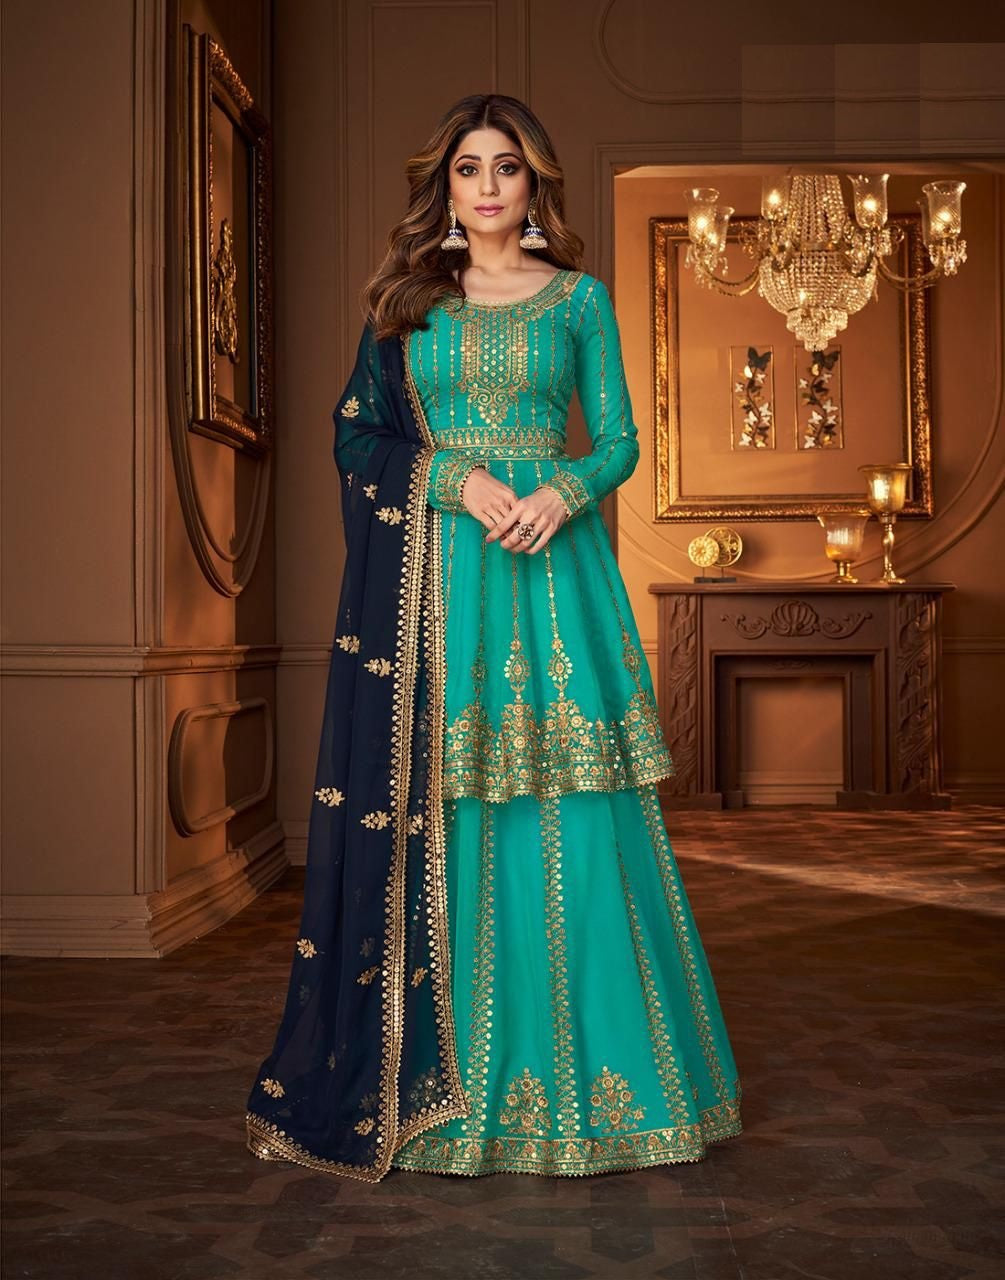 Bottle Green Color Georgette Embroided Semi Stitched Ghaghra Suit